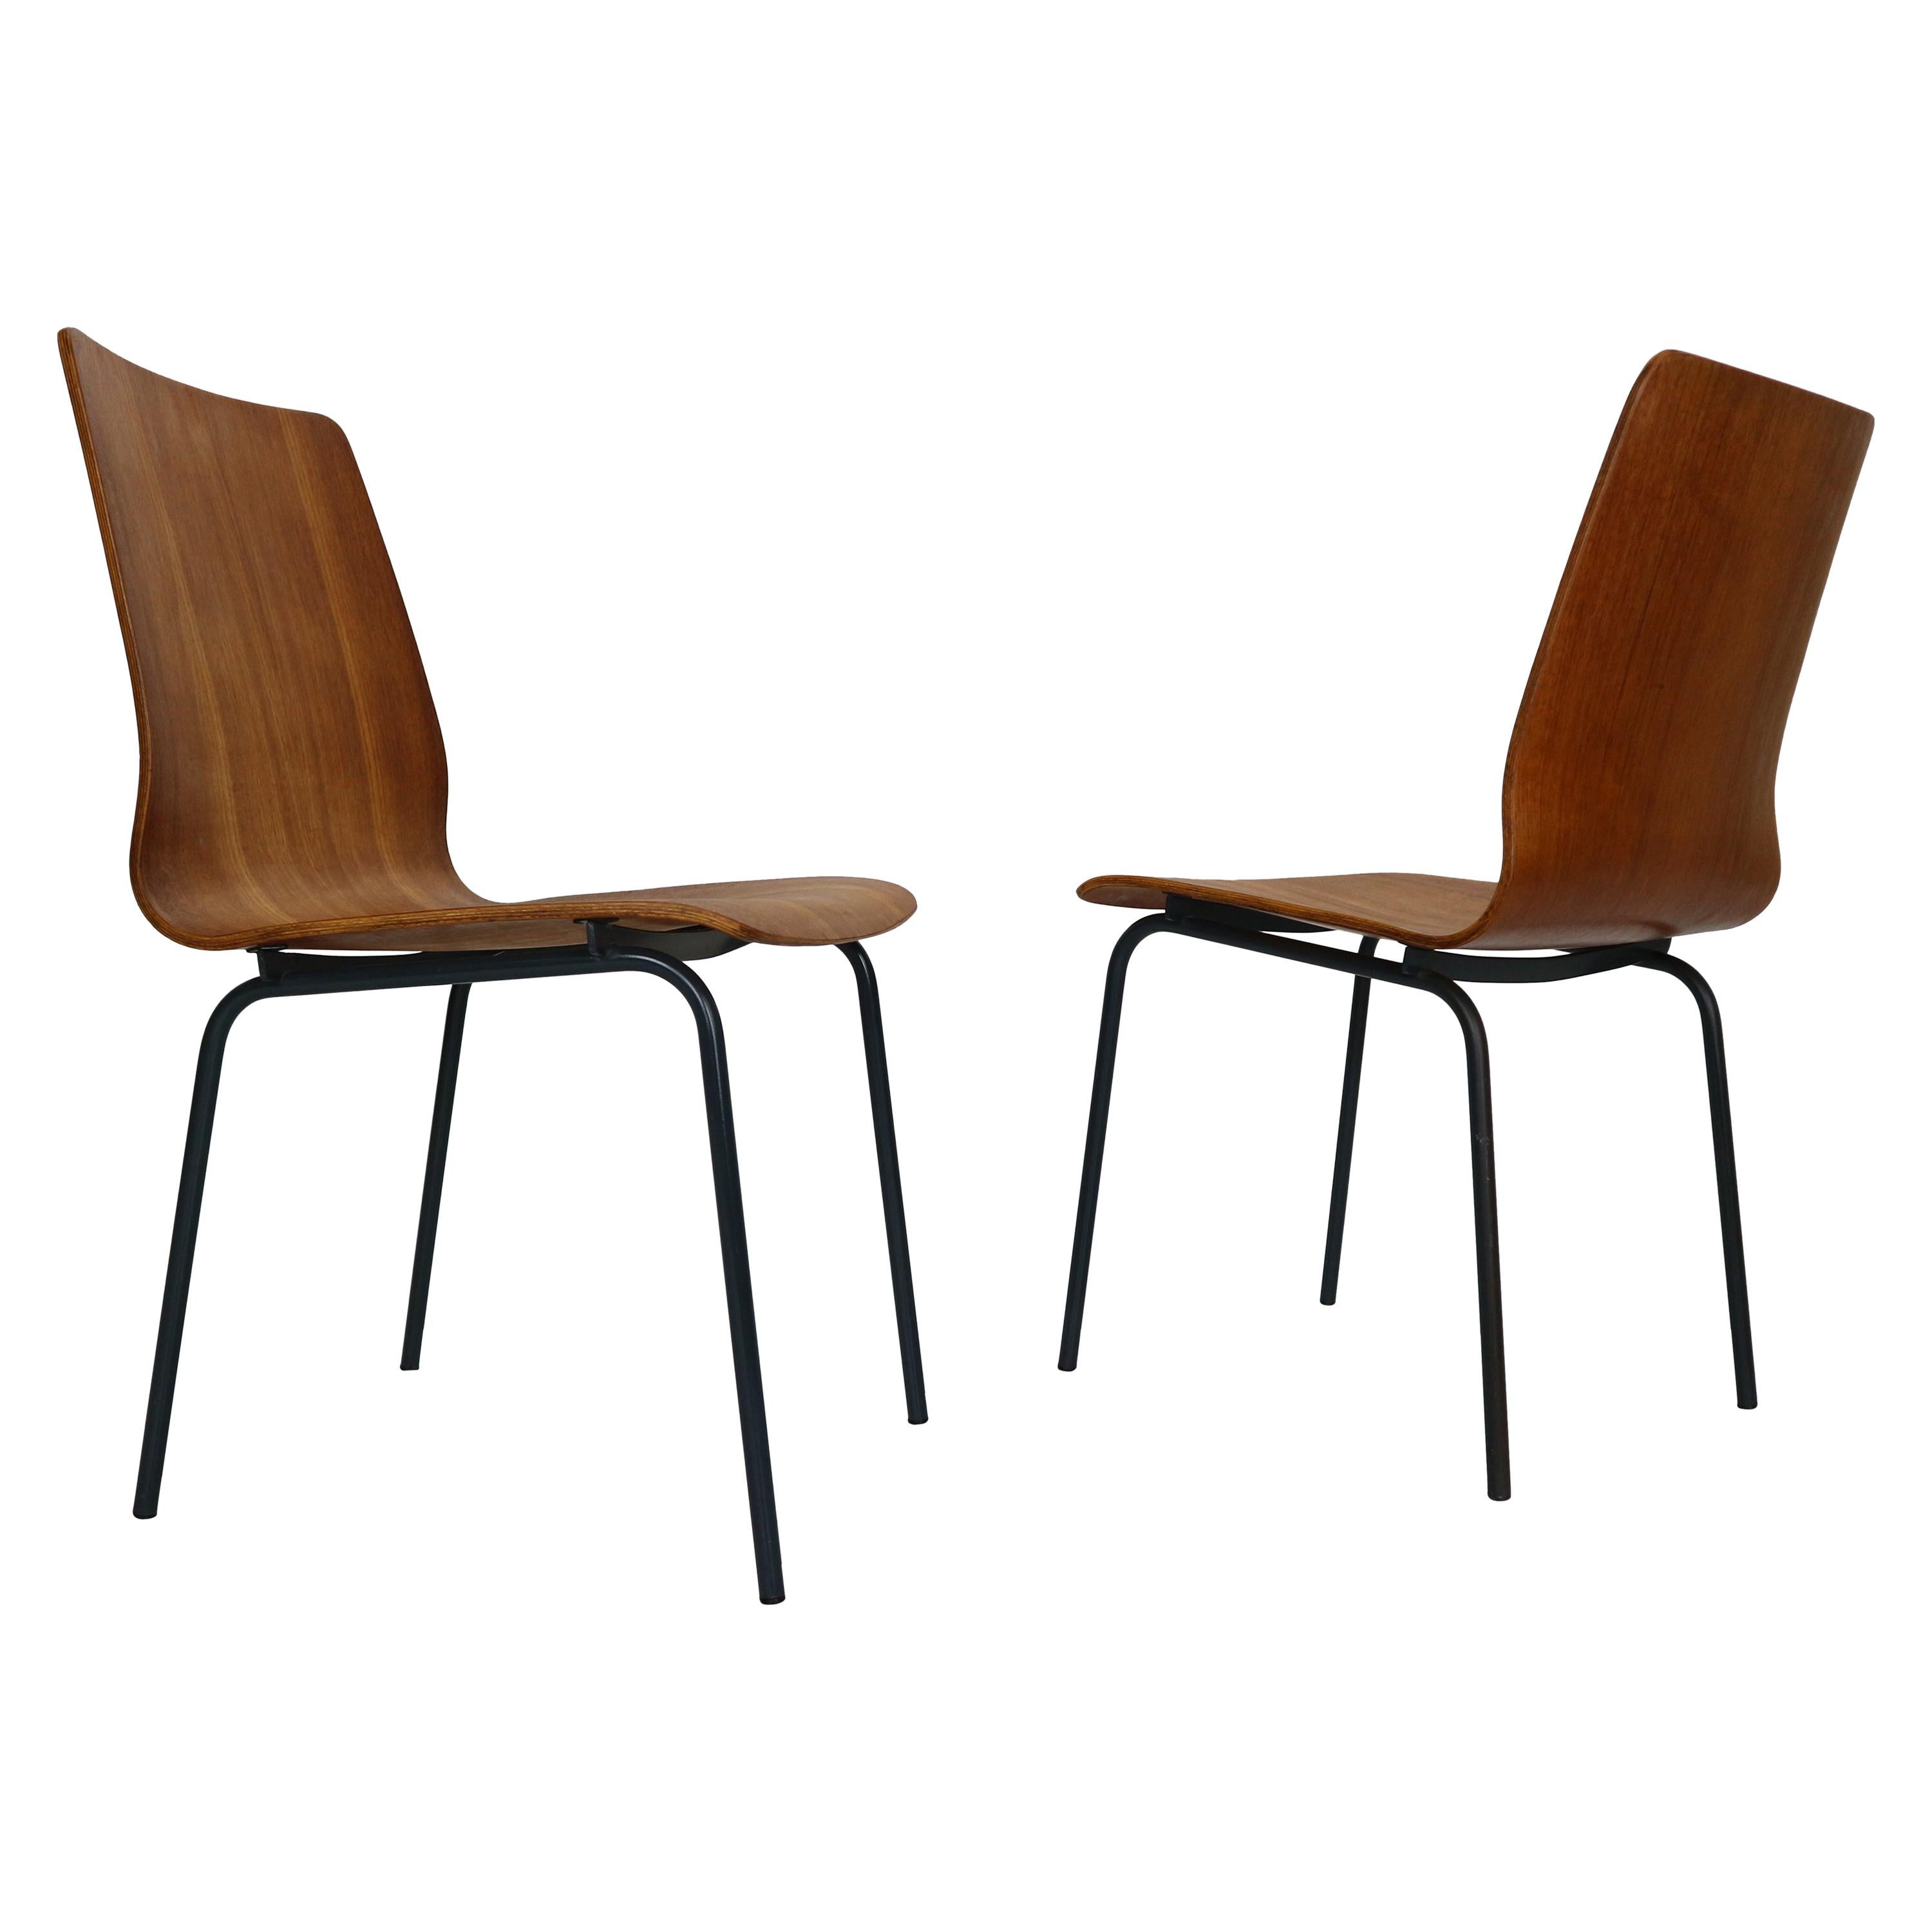 Pair of Teak Dinning Room Chairs "Euroika" by Fristo Kramer for Auping,  1950s at 1stDibs